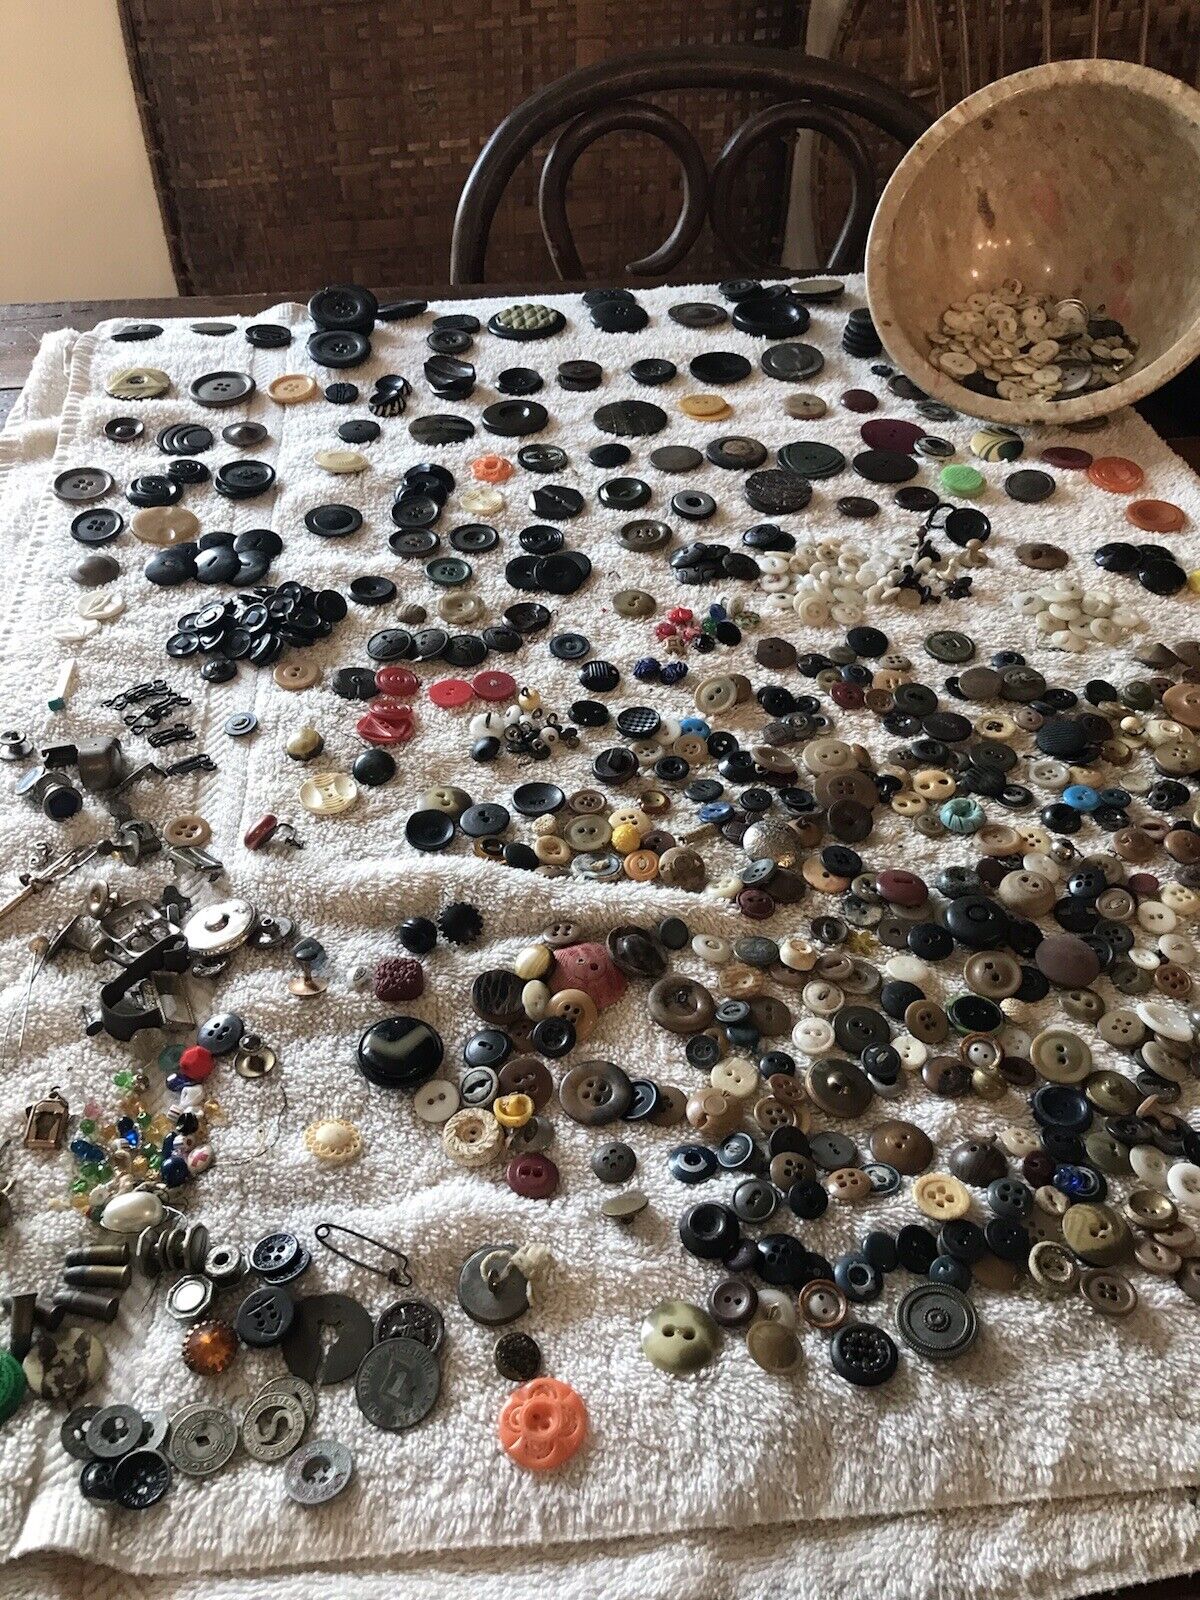 Huge Antique Vintage Lot Of Buttons Mother Of Pearl Abalone Bakelite & More 800+